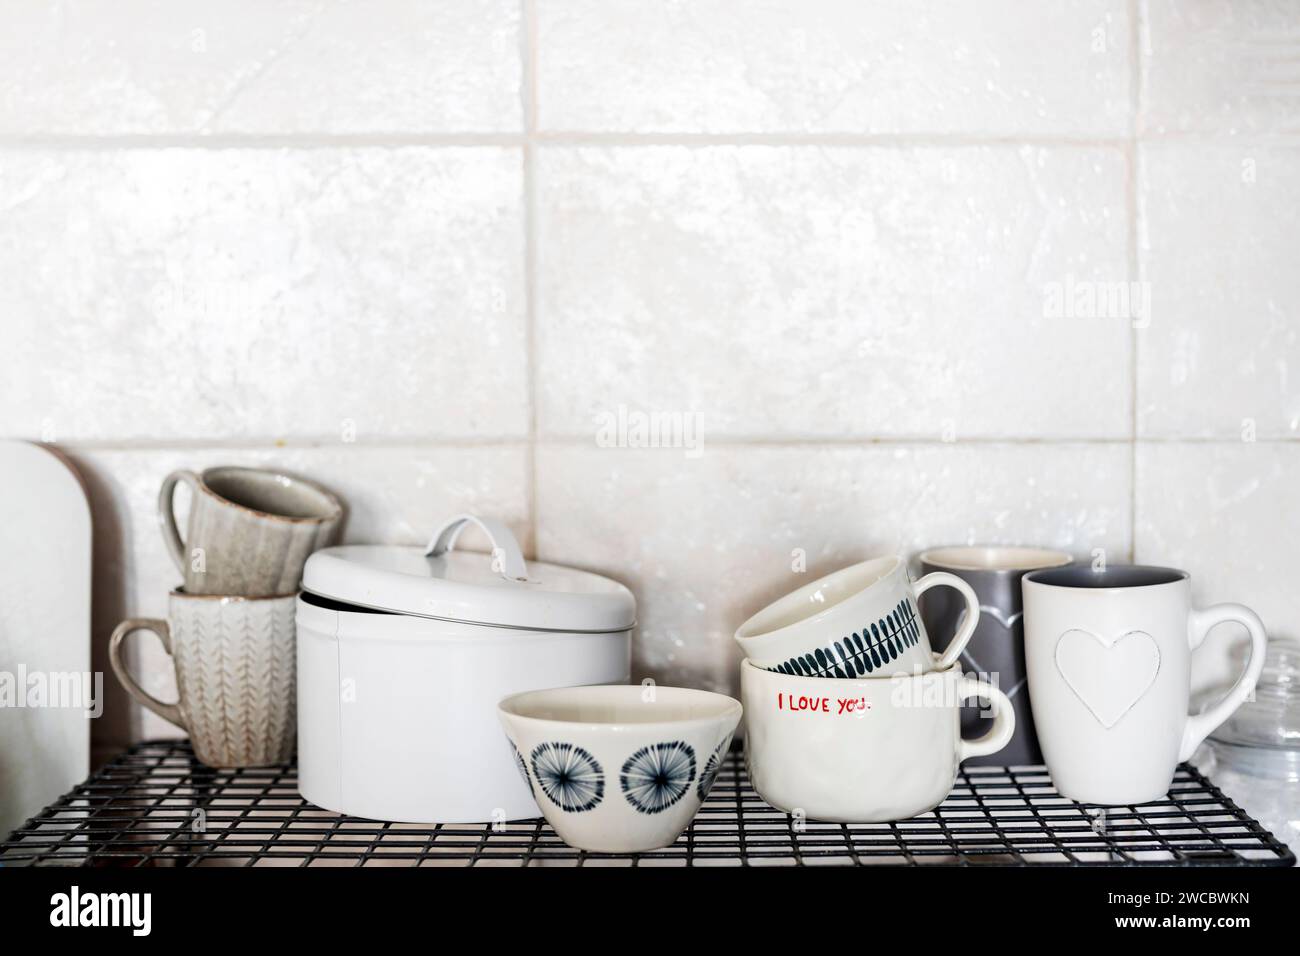 Gray and white cups with hearts and the inscription - I love you on a shelf in the kitchen against the background of a gray tiled wall. Stock Photo